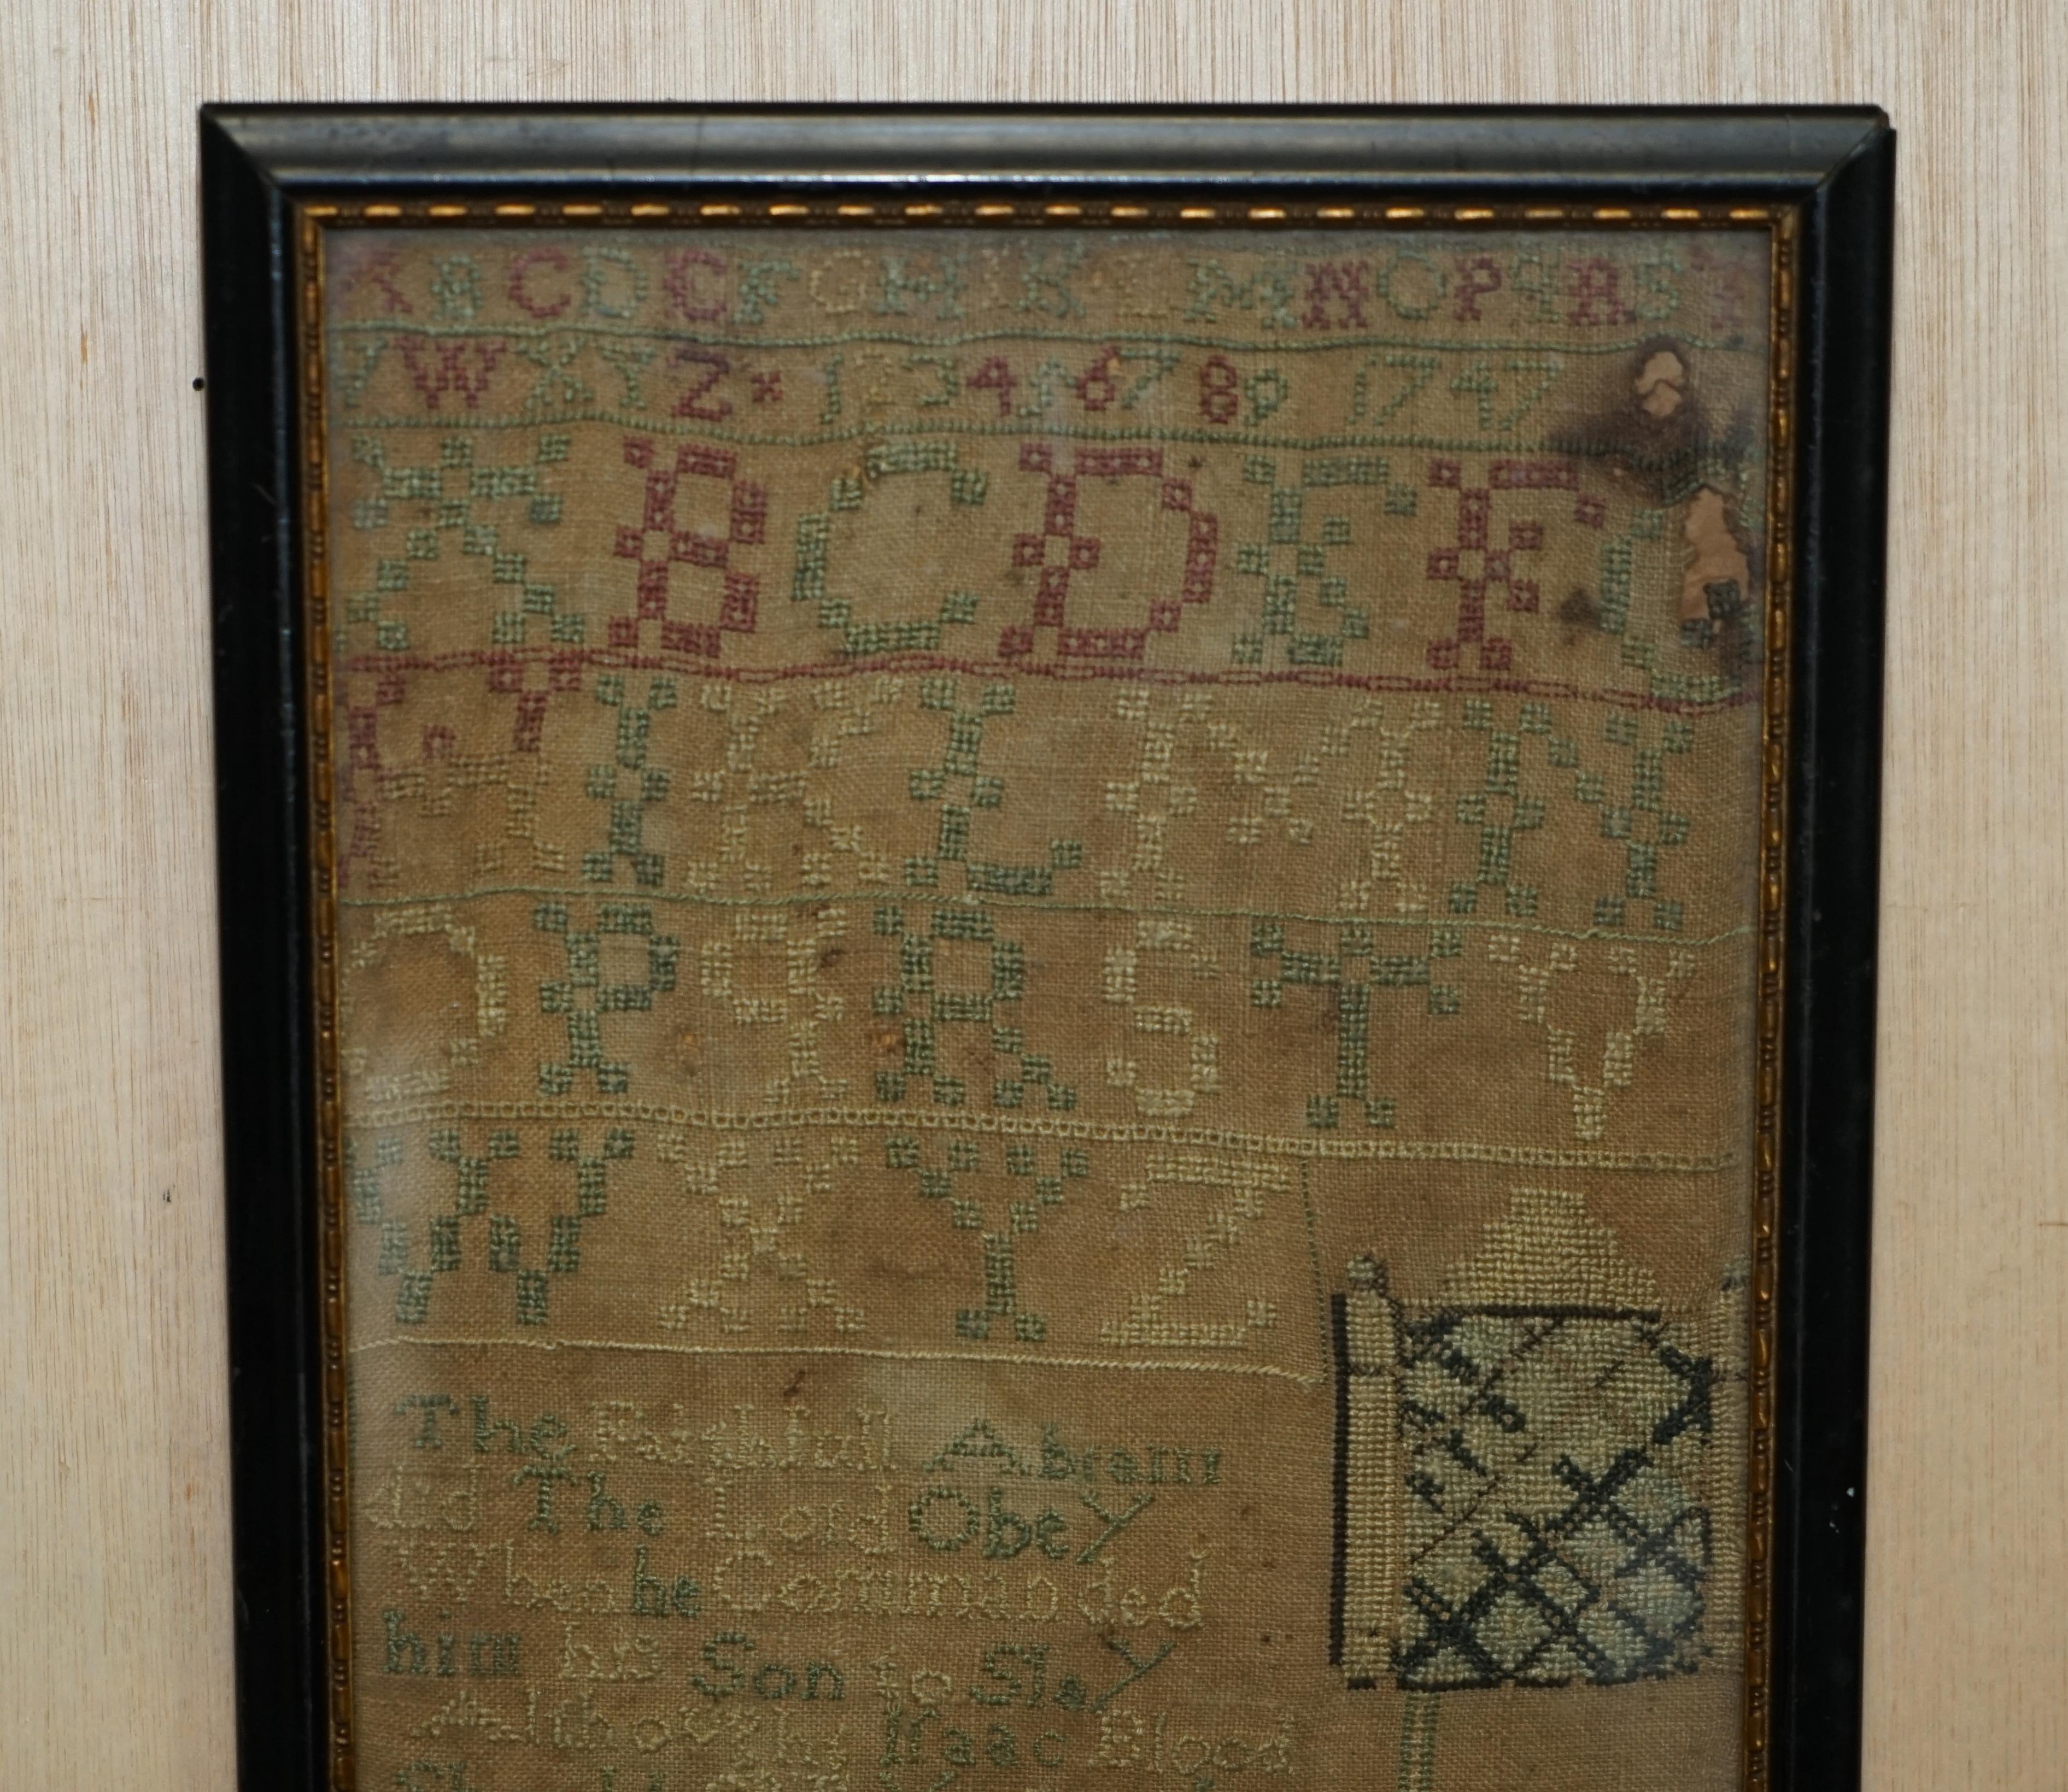 We are delighted to offer for sale this rather stunning, 1747 dated needlework Mary Campbell sampler from Scotland

I have three of these samplers for sale, they are dated 1830, 1747 and 1888, this sale is for the one mentioned above only, the